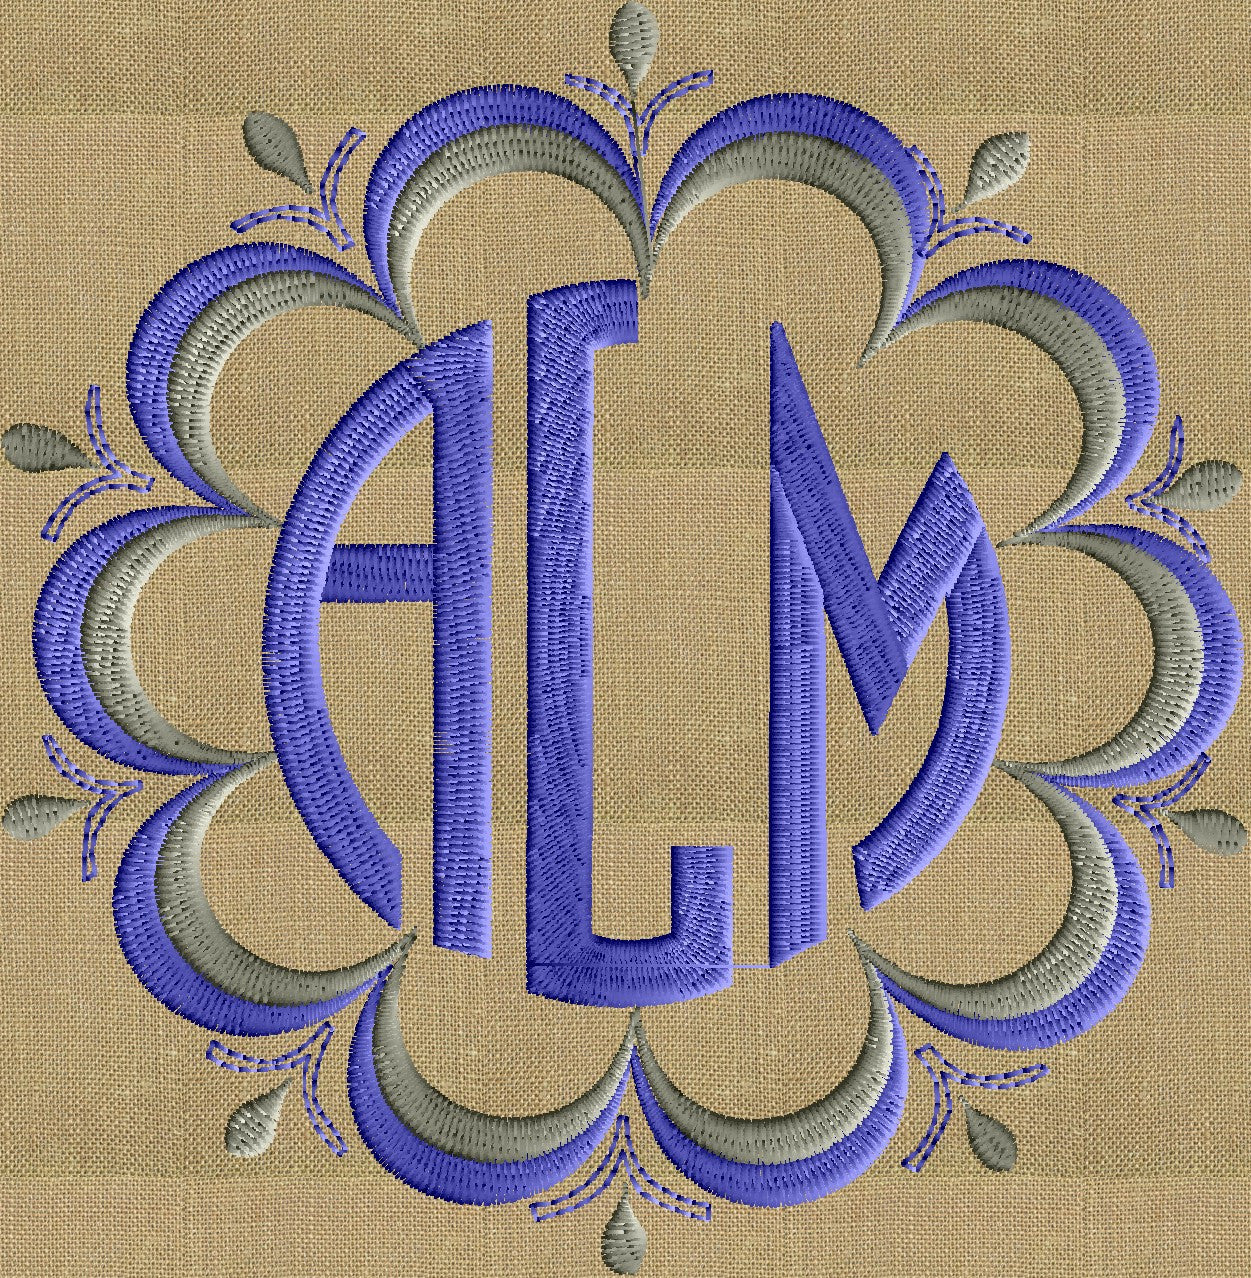 Double Scalloped Font Frame Monogram Embroidery Design Font not included - 2 sizes - Instant download Hus Dst Exp Vp3 Jef Pes